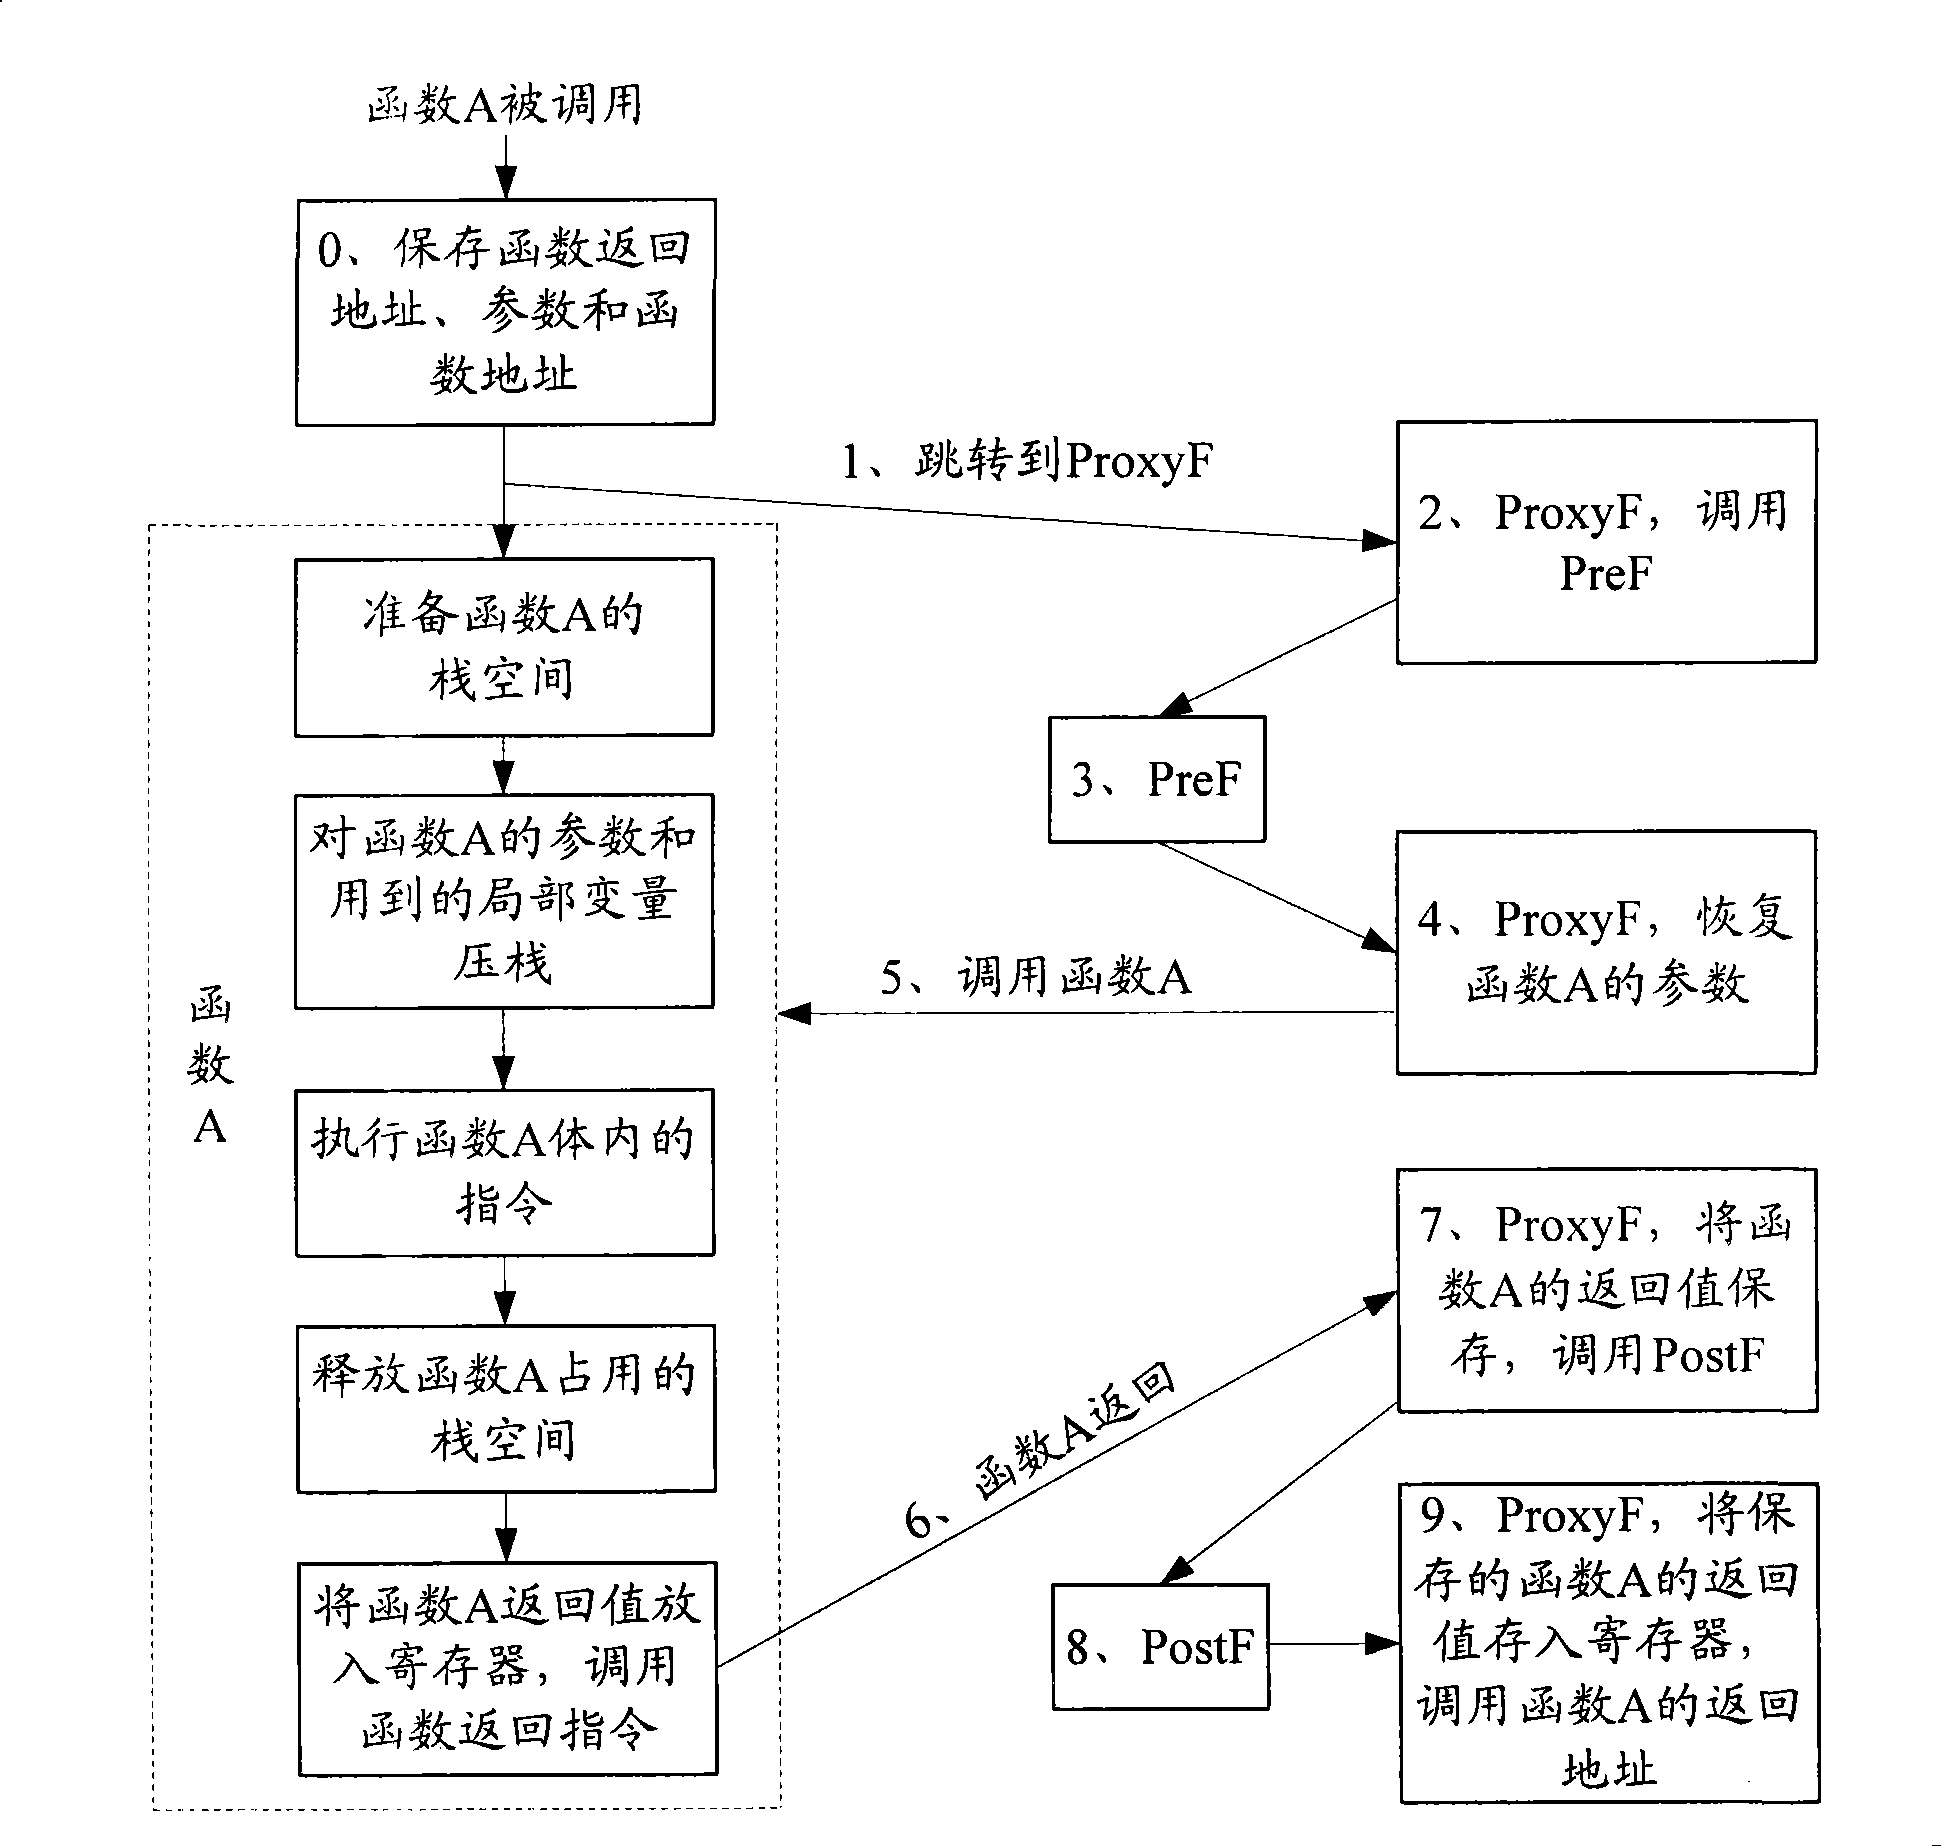 Method and apparatus for function running state statistics